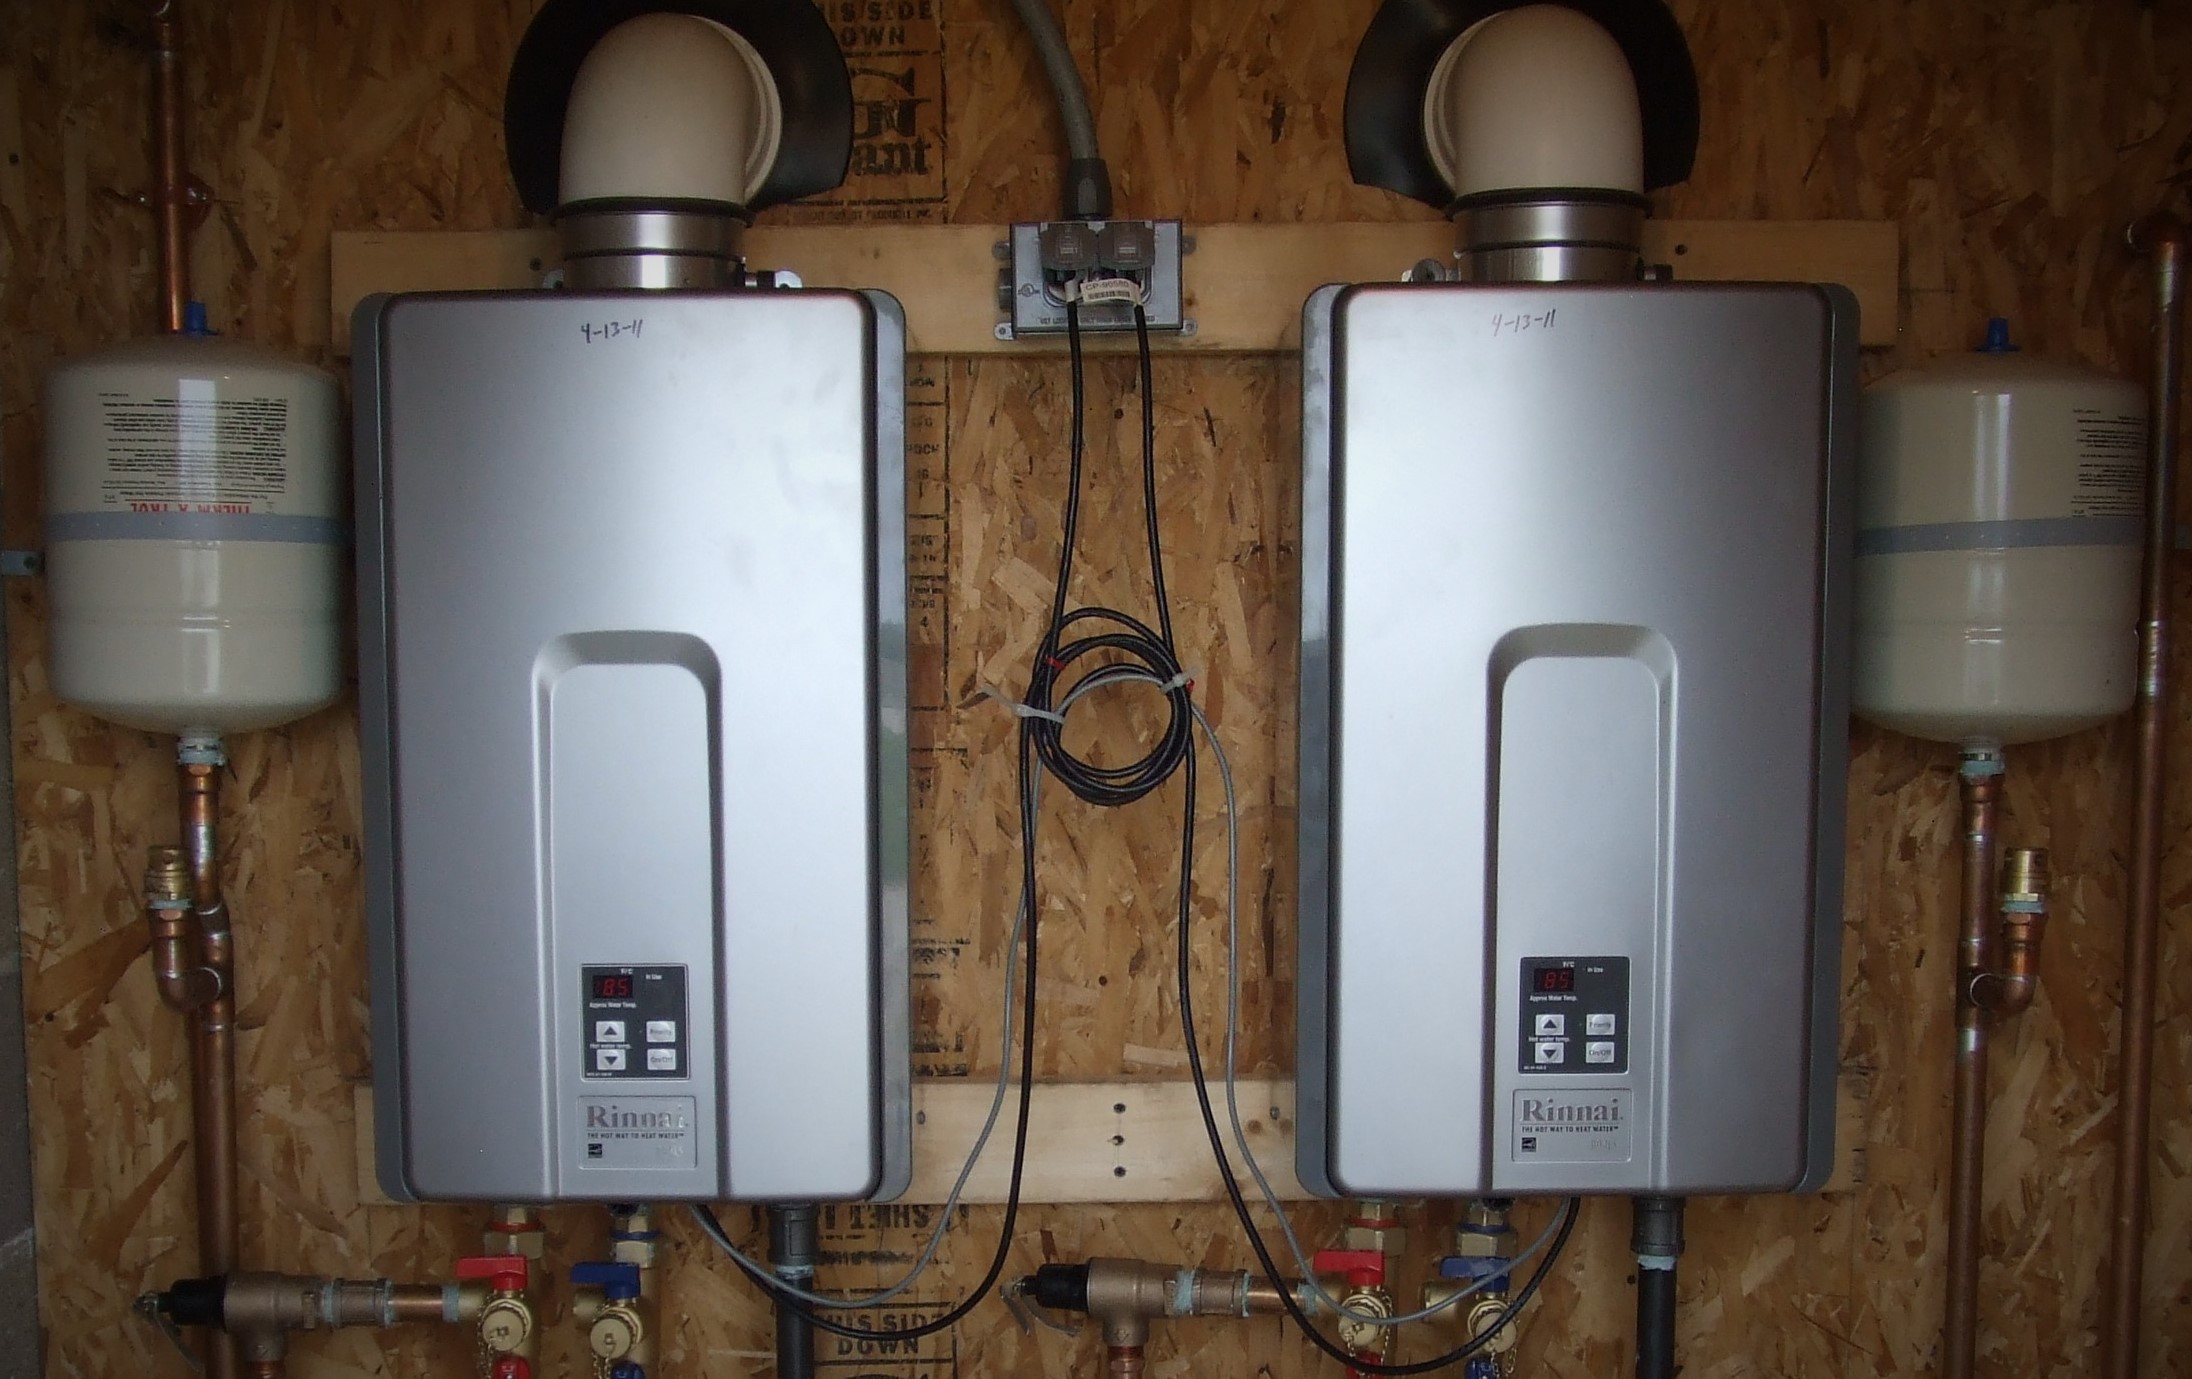 rinnai-tankless-water-heater-reviews-pricing-and-public-perception